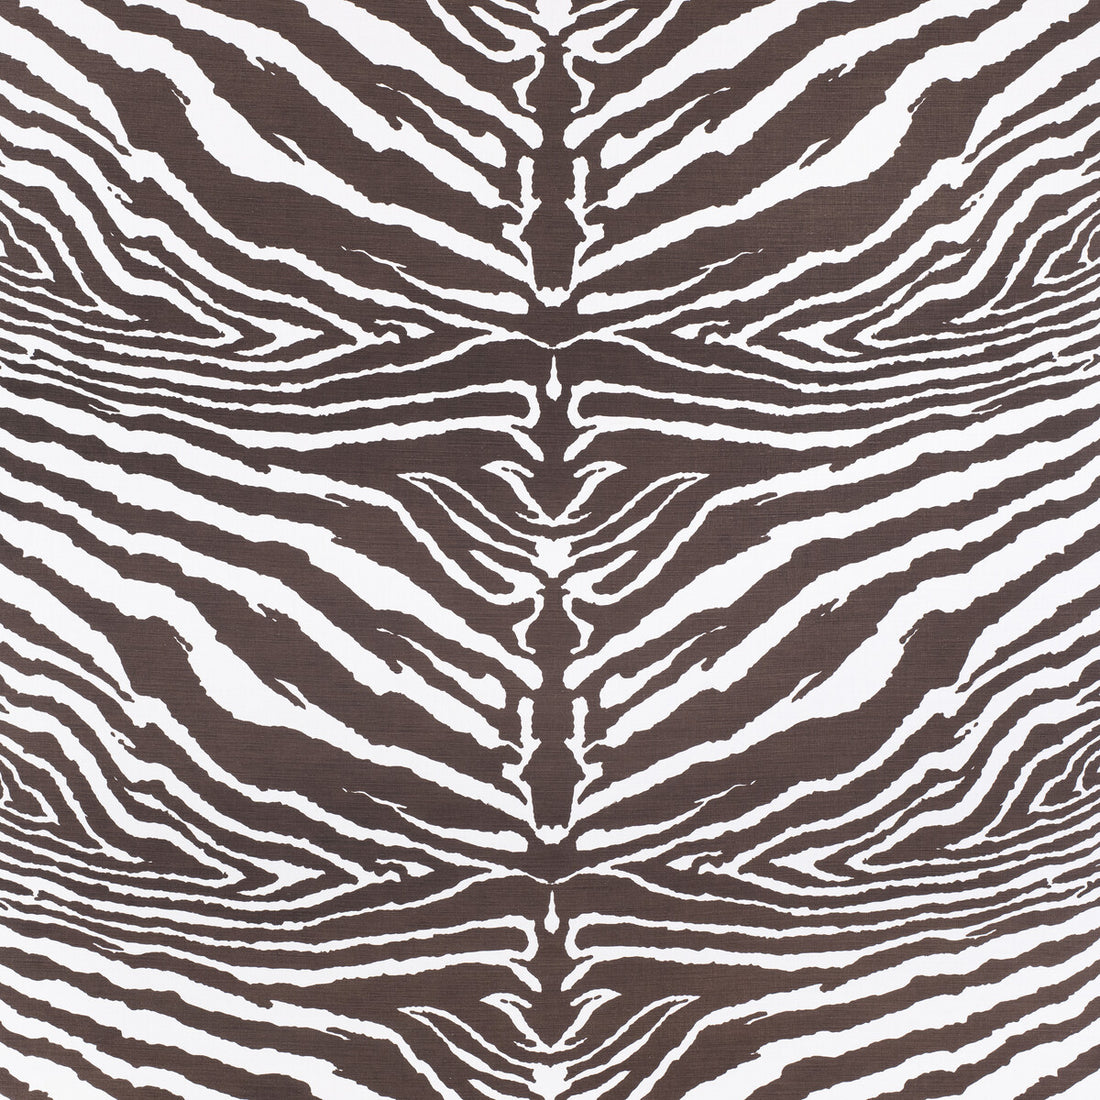 Zebra fabric in brown color - pattern 2020171.66.0 - by Lee Jofa in the Paolo Moschino Fabrics collection